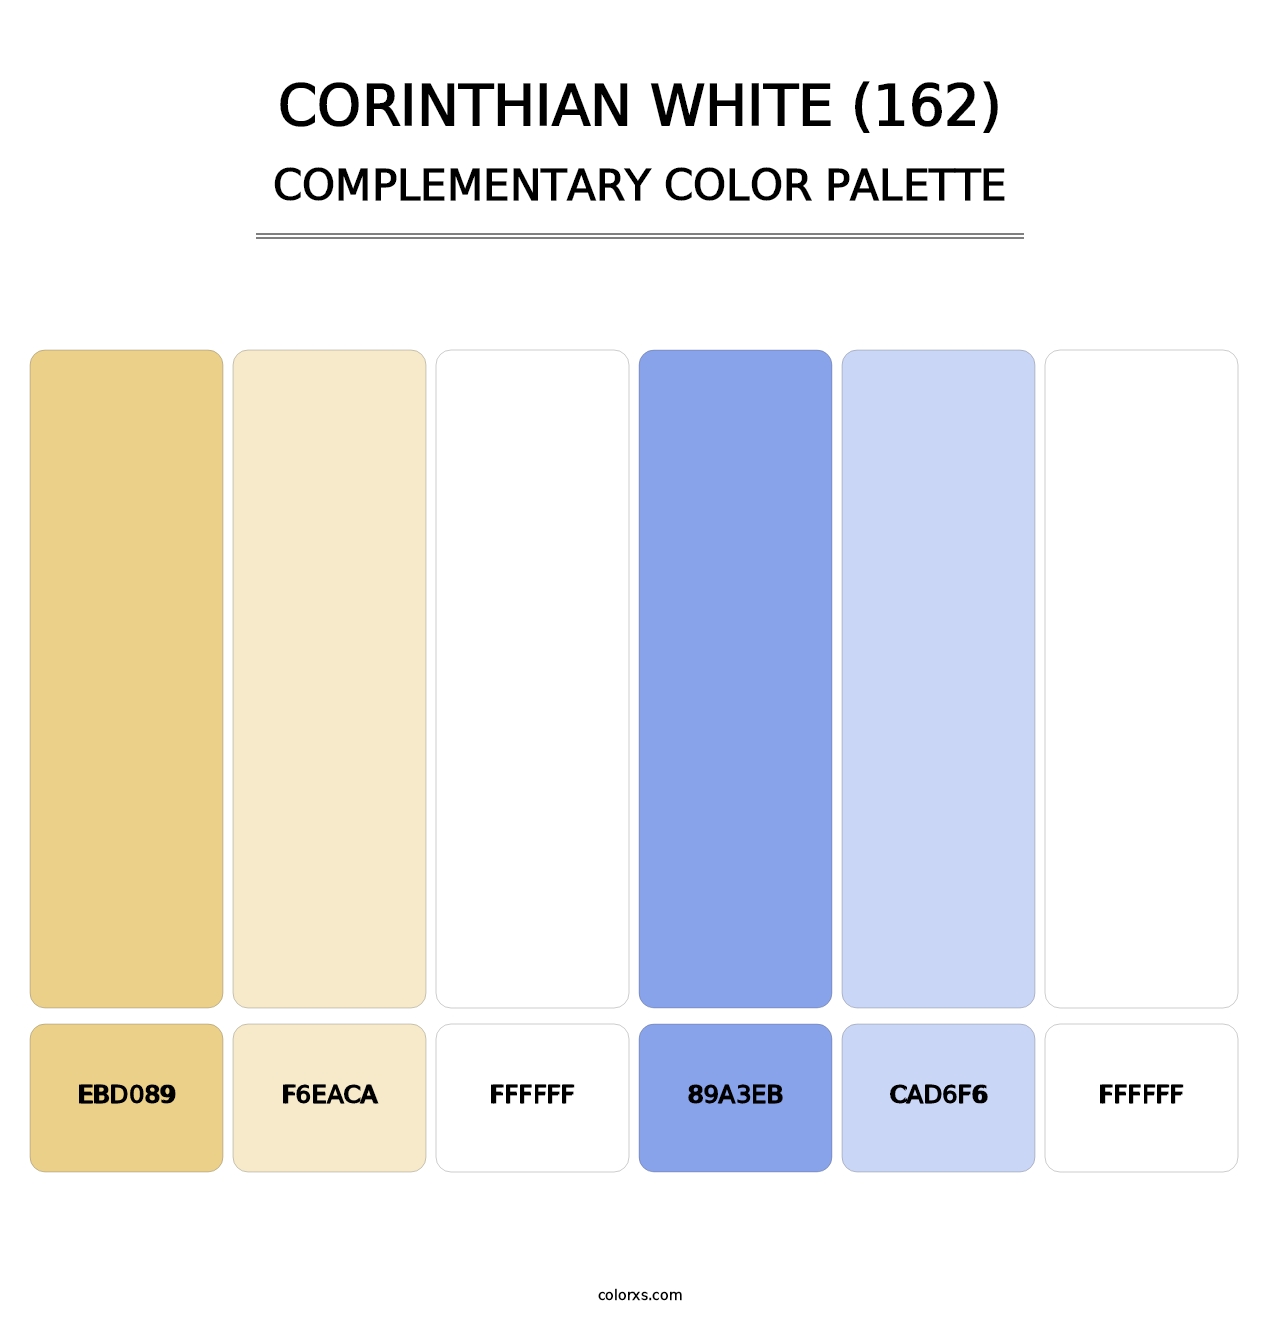 Corinthian White (162) - Complementary Color Palette